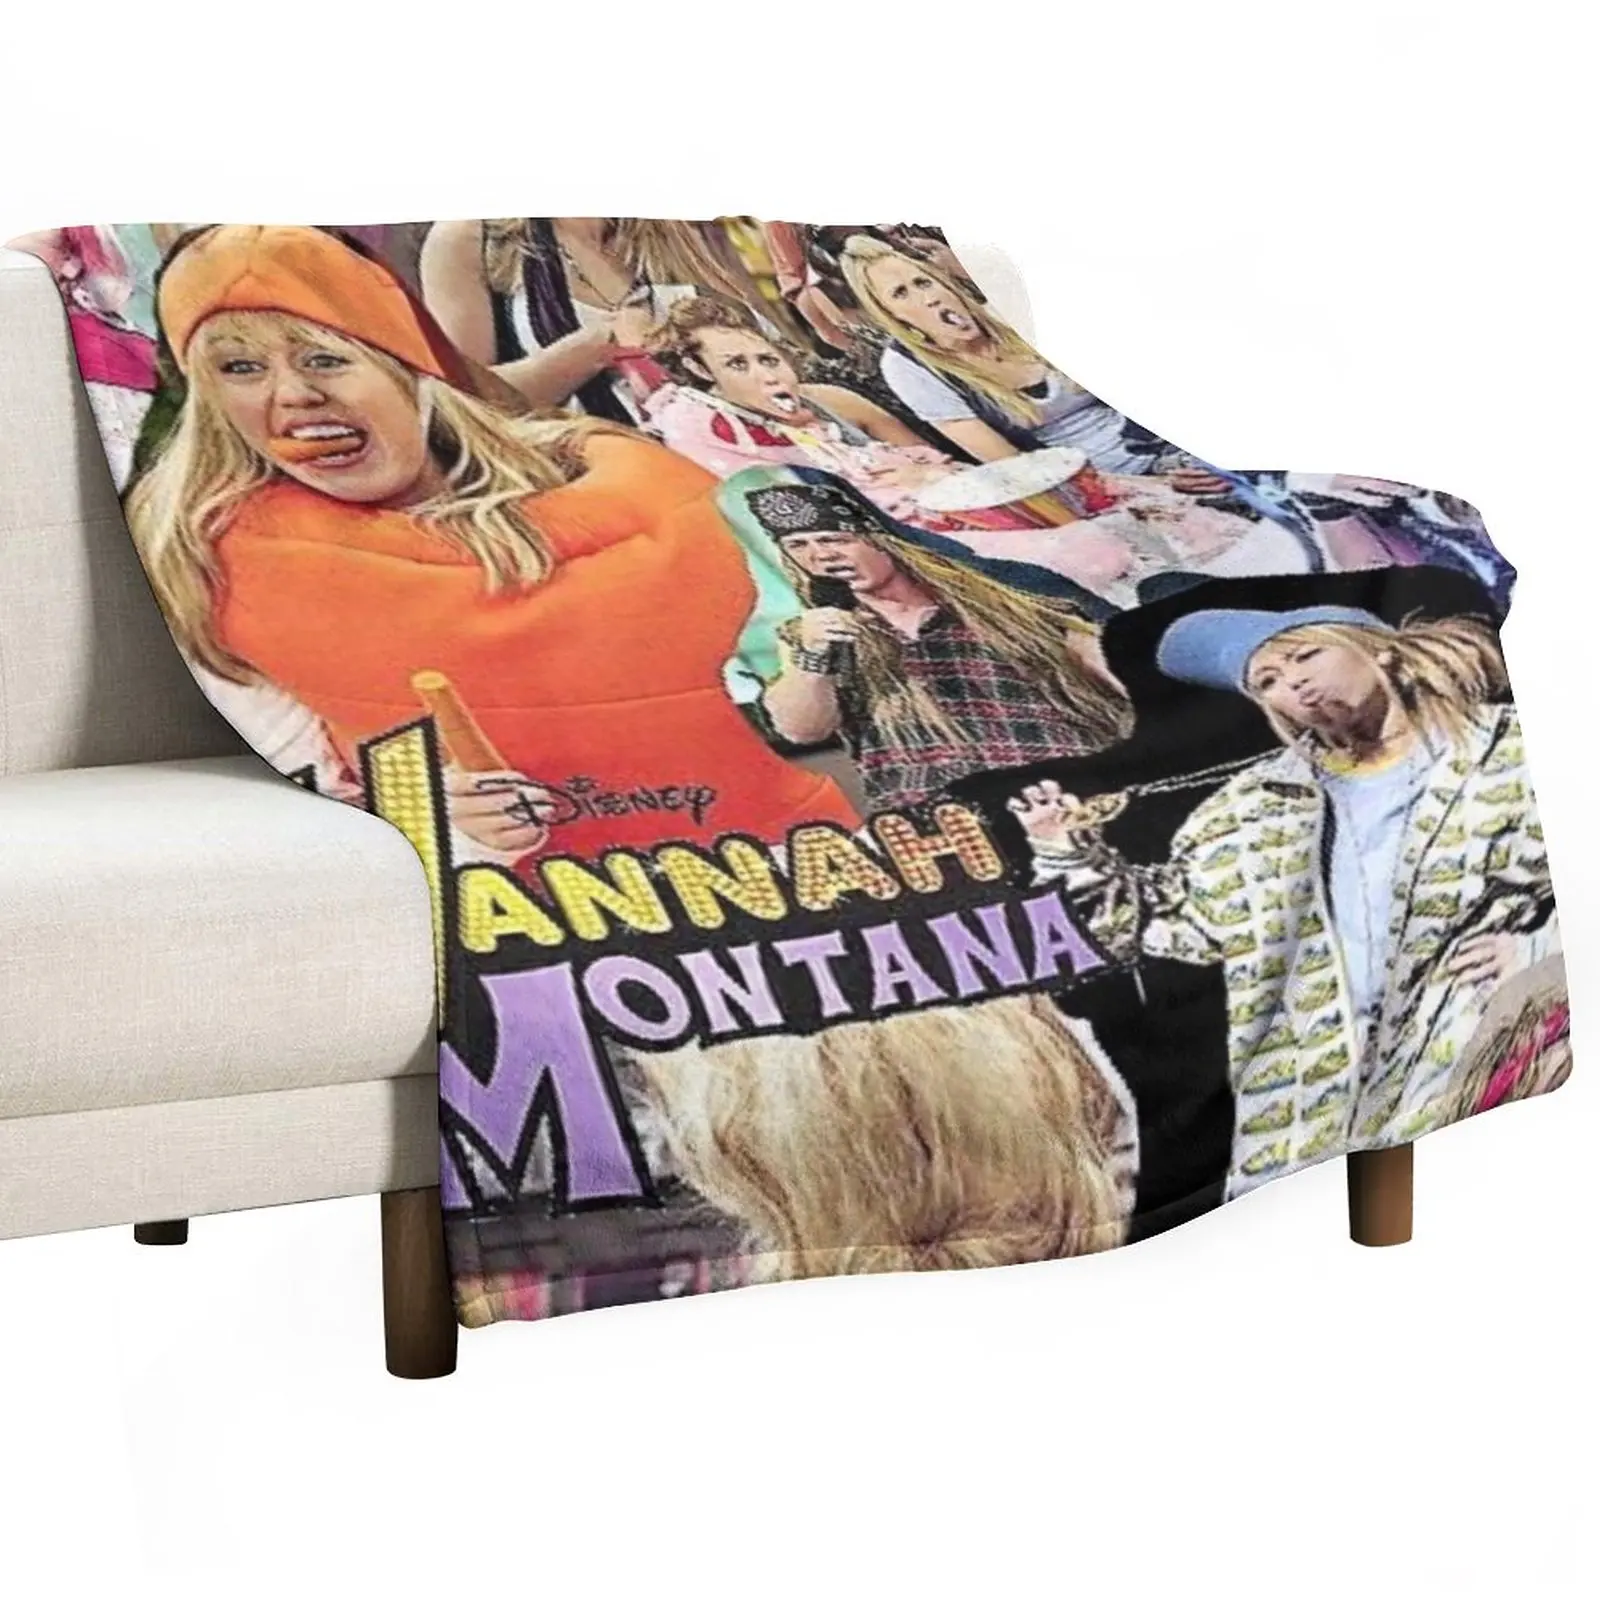 

New Hannah collage Throw Blanket throw blanket for sofa Winter bed blankets Loose Blanket